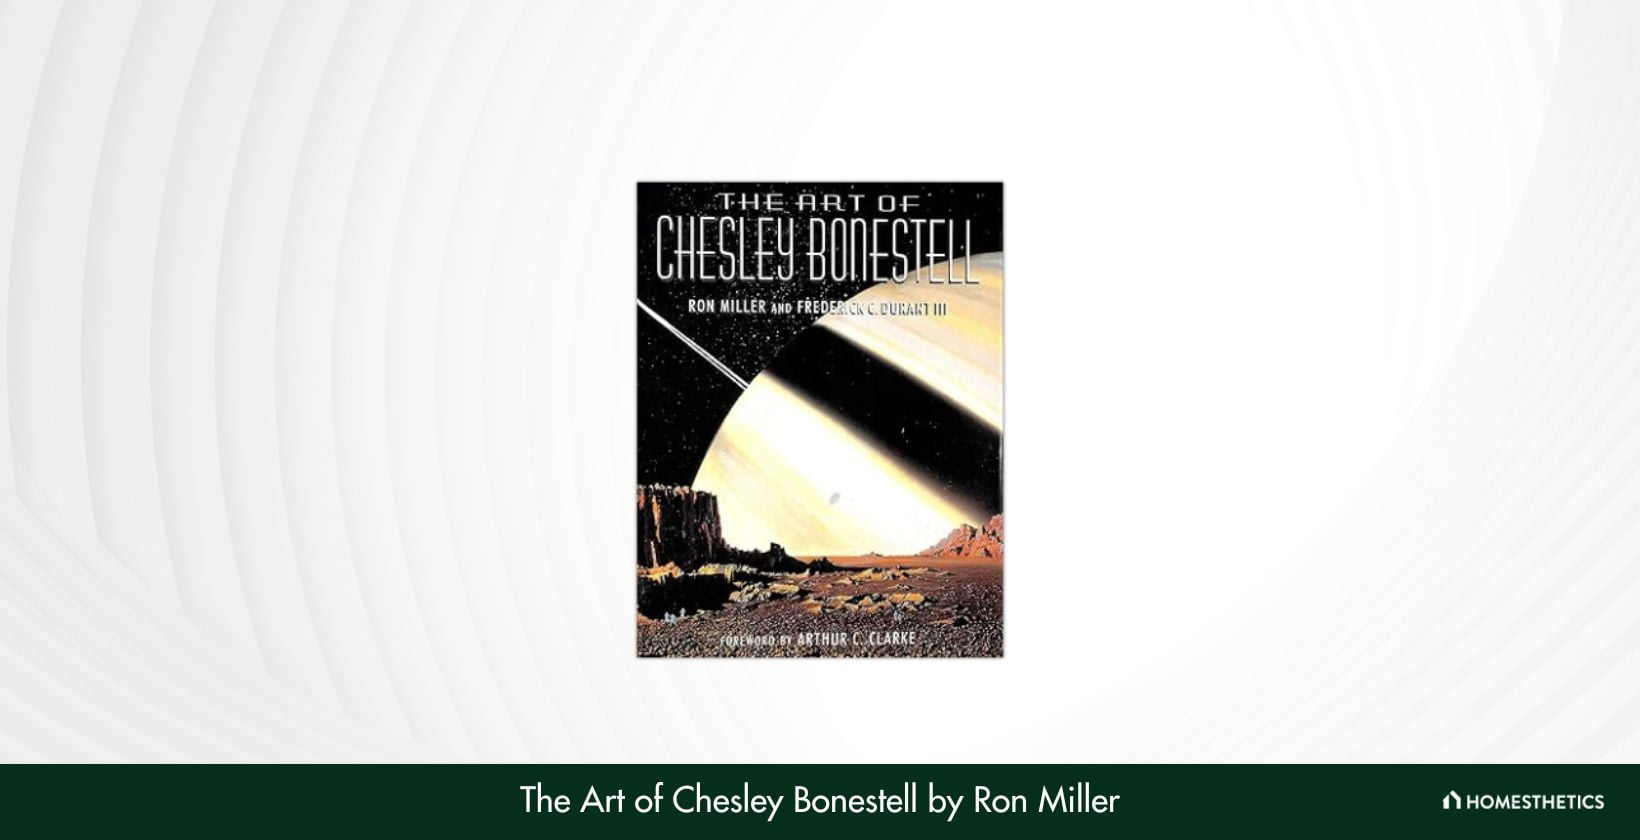 The Art of Chesley Bonestell by Ron Miller